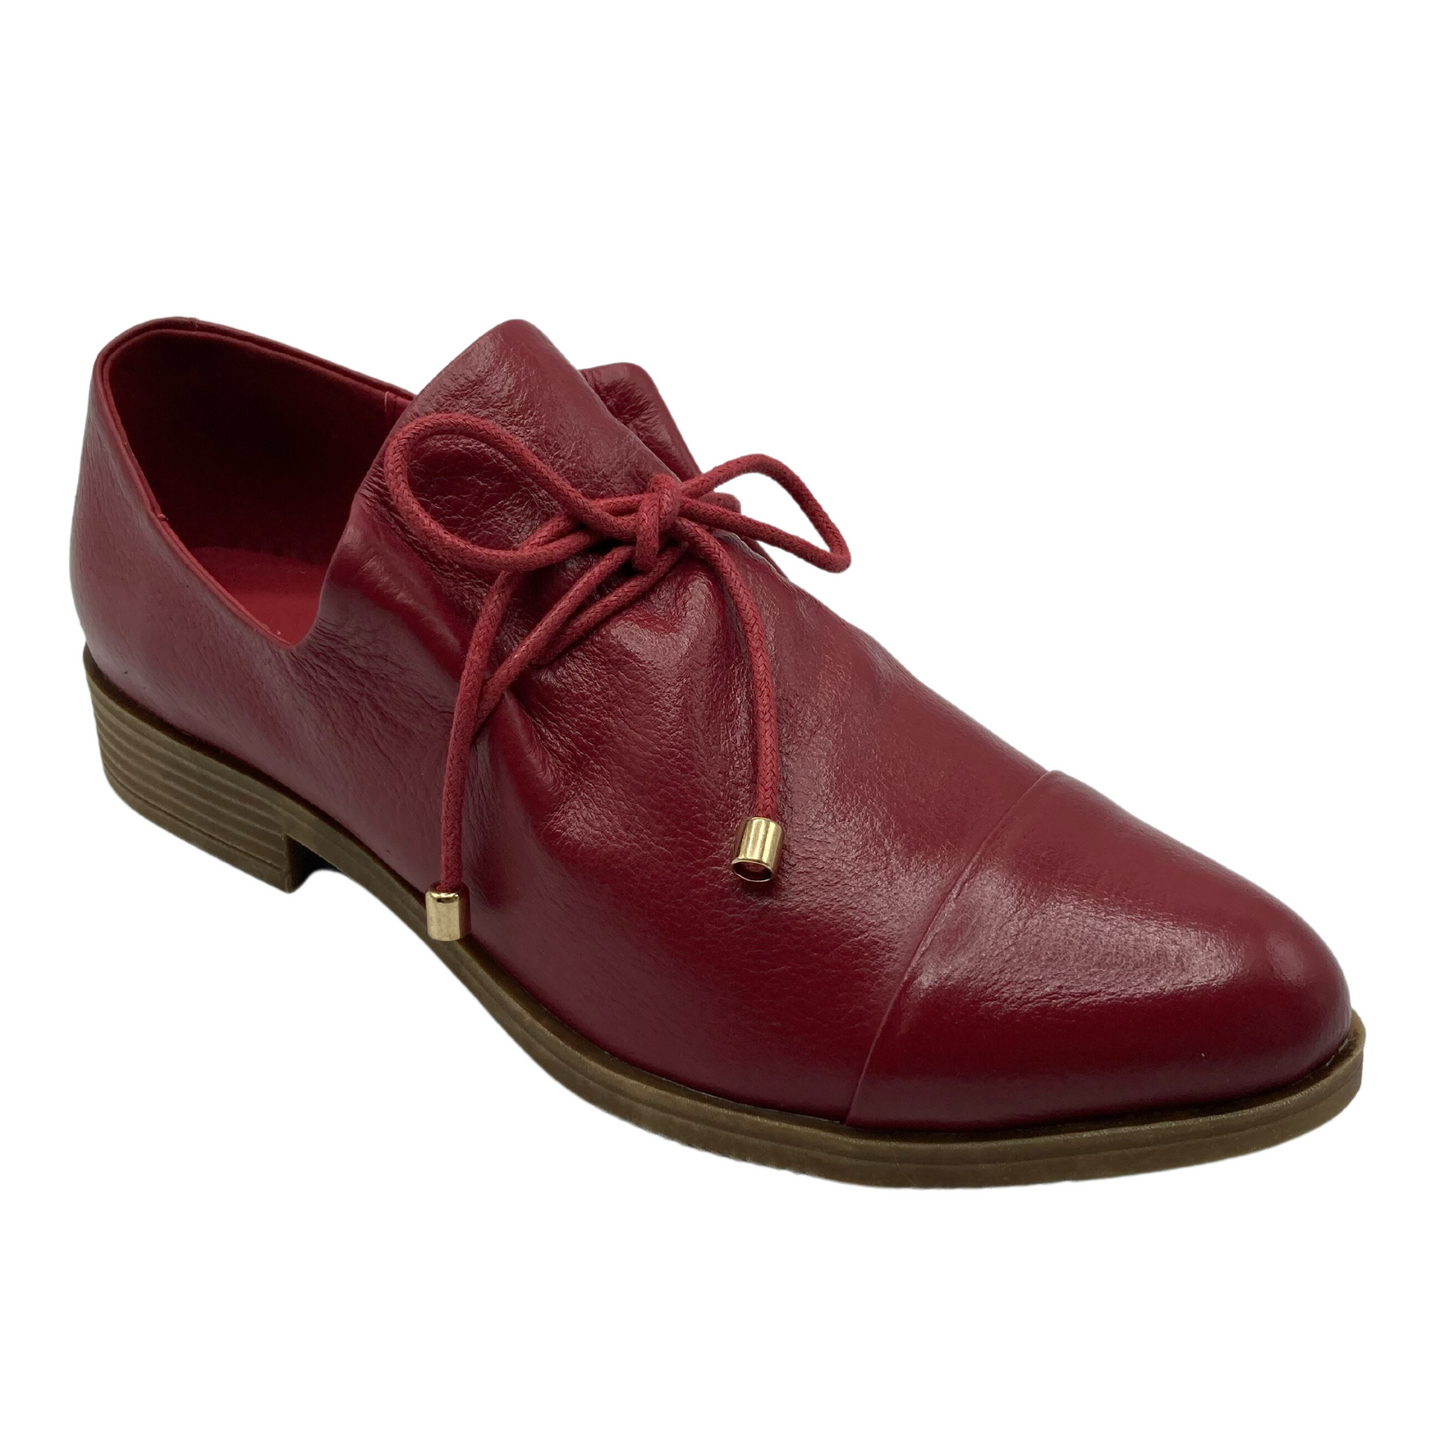 45 degree angled view of red leather shoe with red laces. Laces have shiny gold aglets.